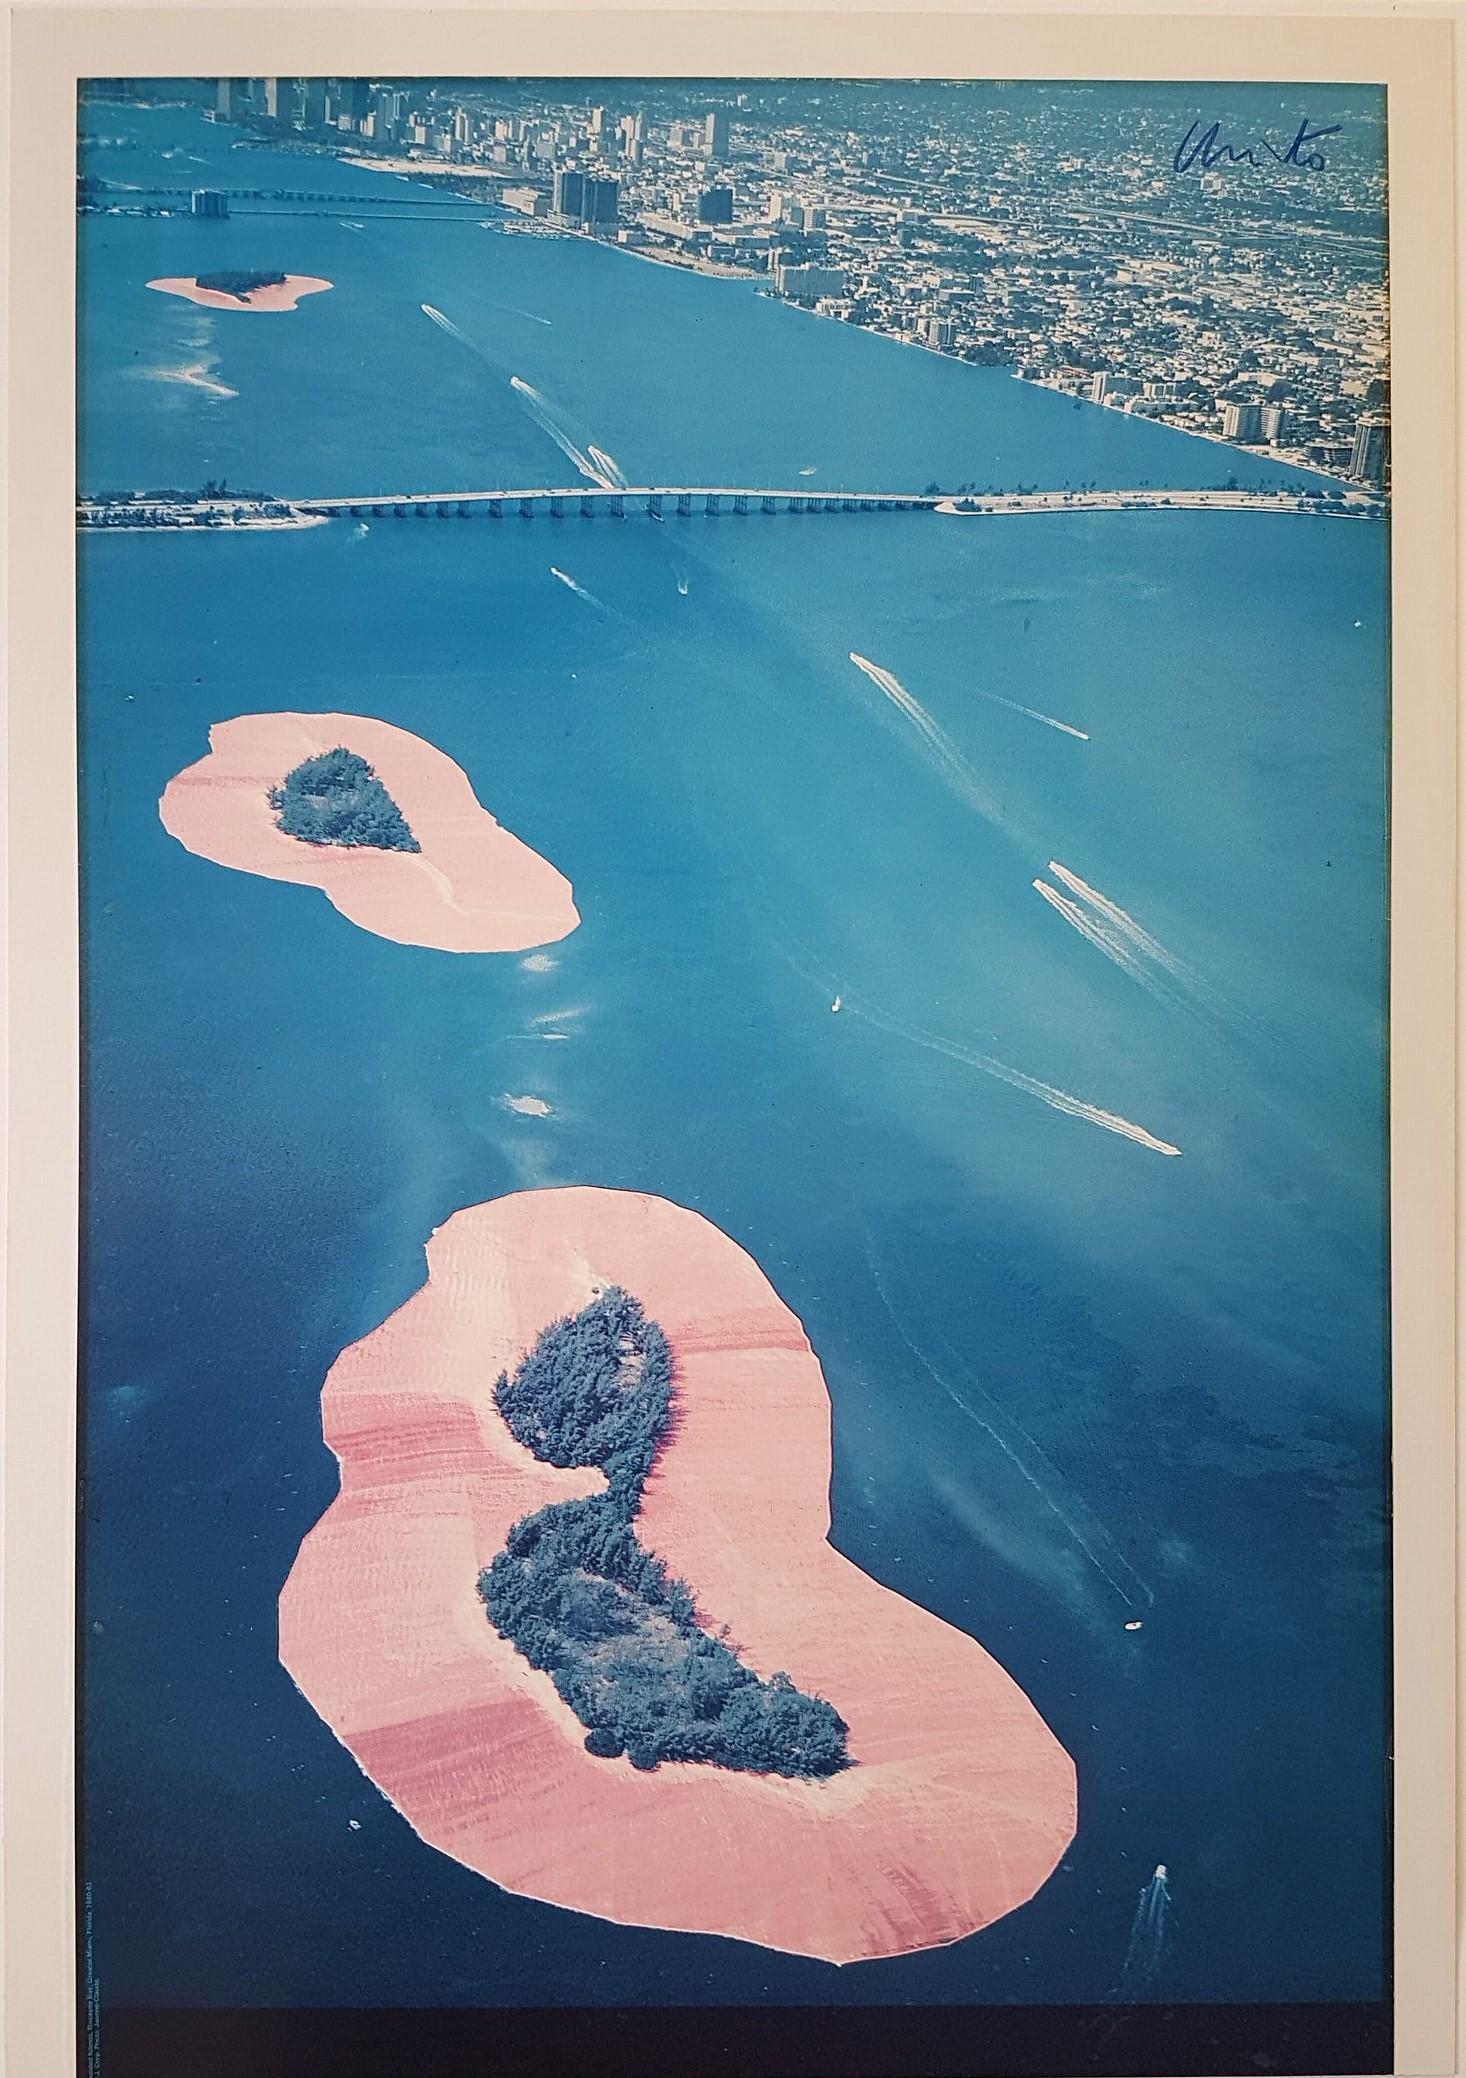 Surrounded Islands, Biscayne Bay, Greater Miami, Florida - Print by Christo and Jeanne-Claude